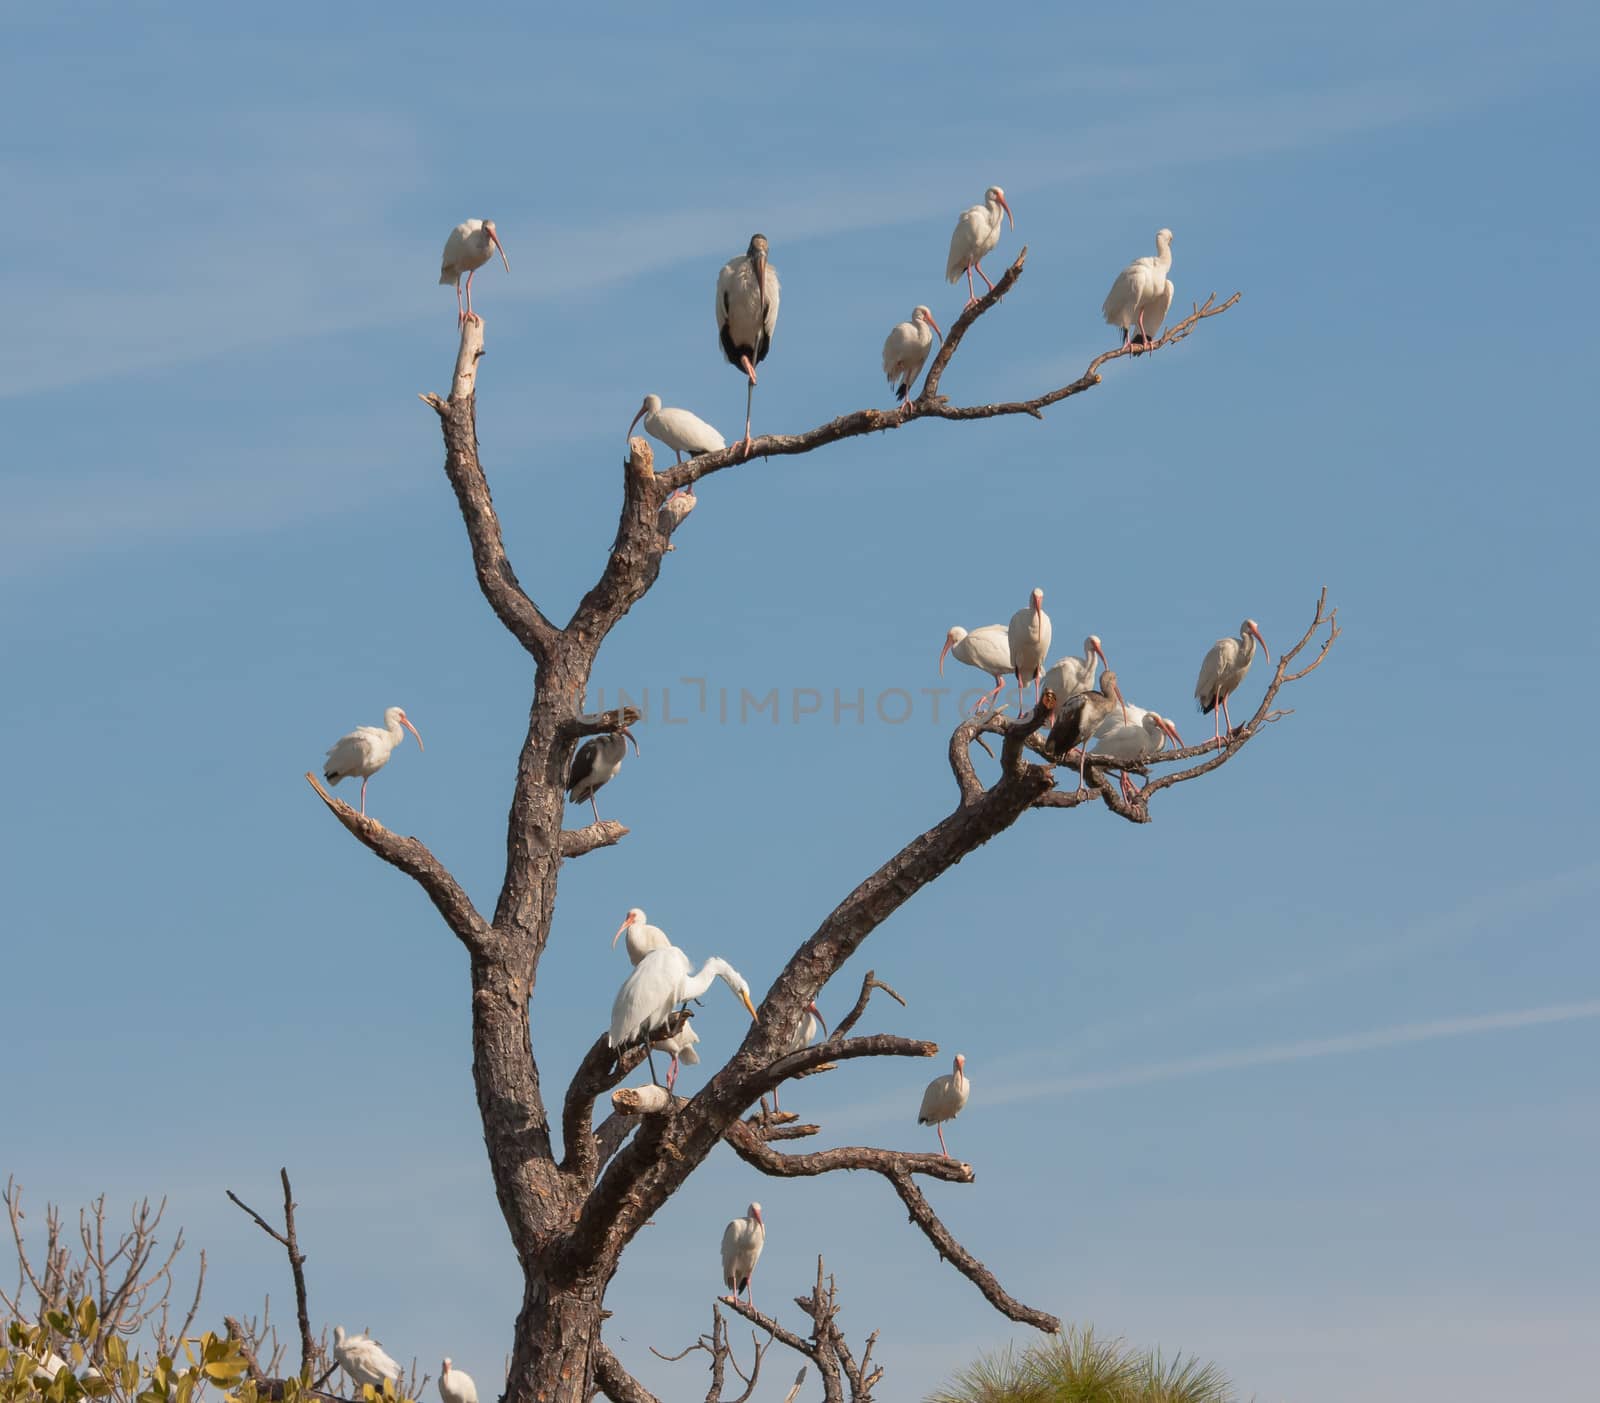 There are a few barren trees alongside the road leading to the Merritt Island Wildlife Reserve. Every once in a while a congregation of birds will gather on one of the trees and might stay for hours. For that period the tree is known as the